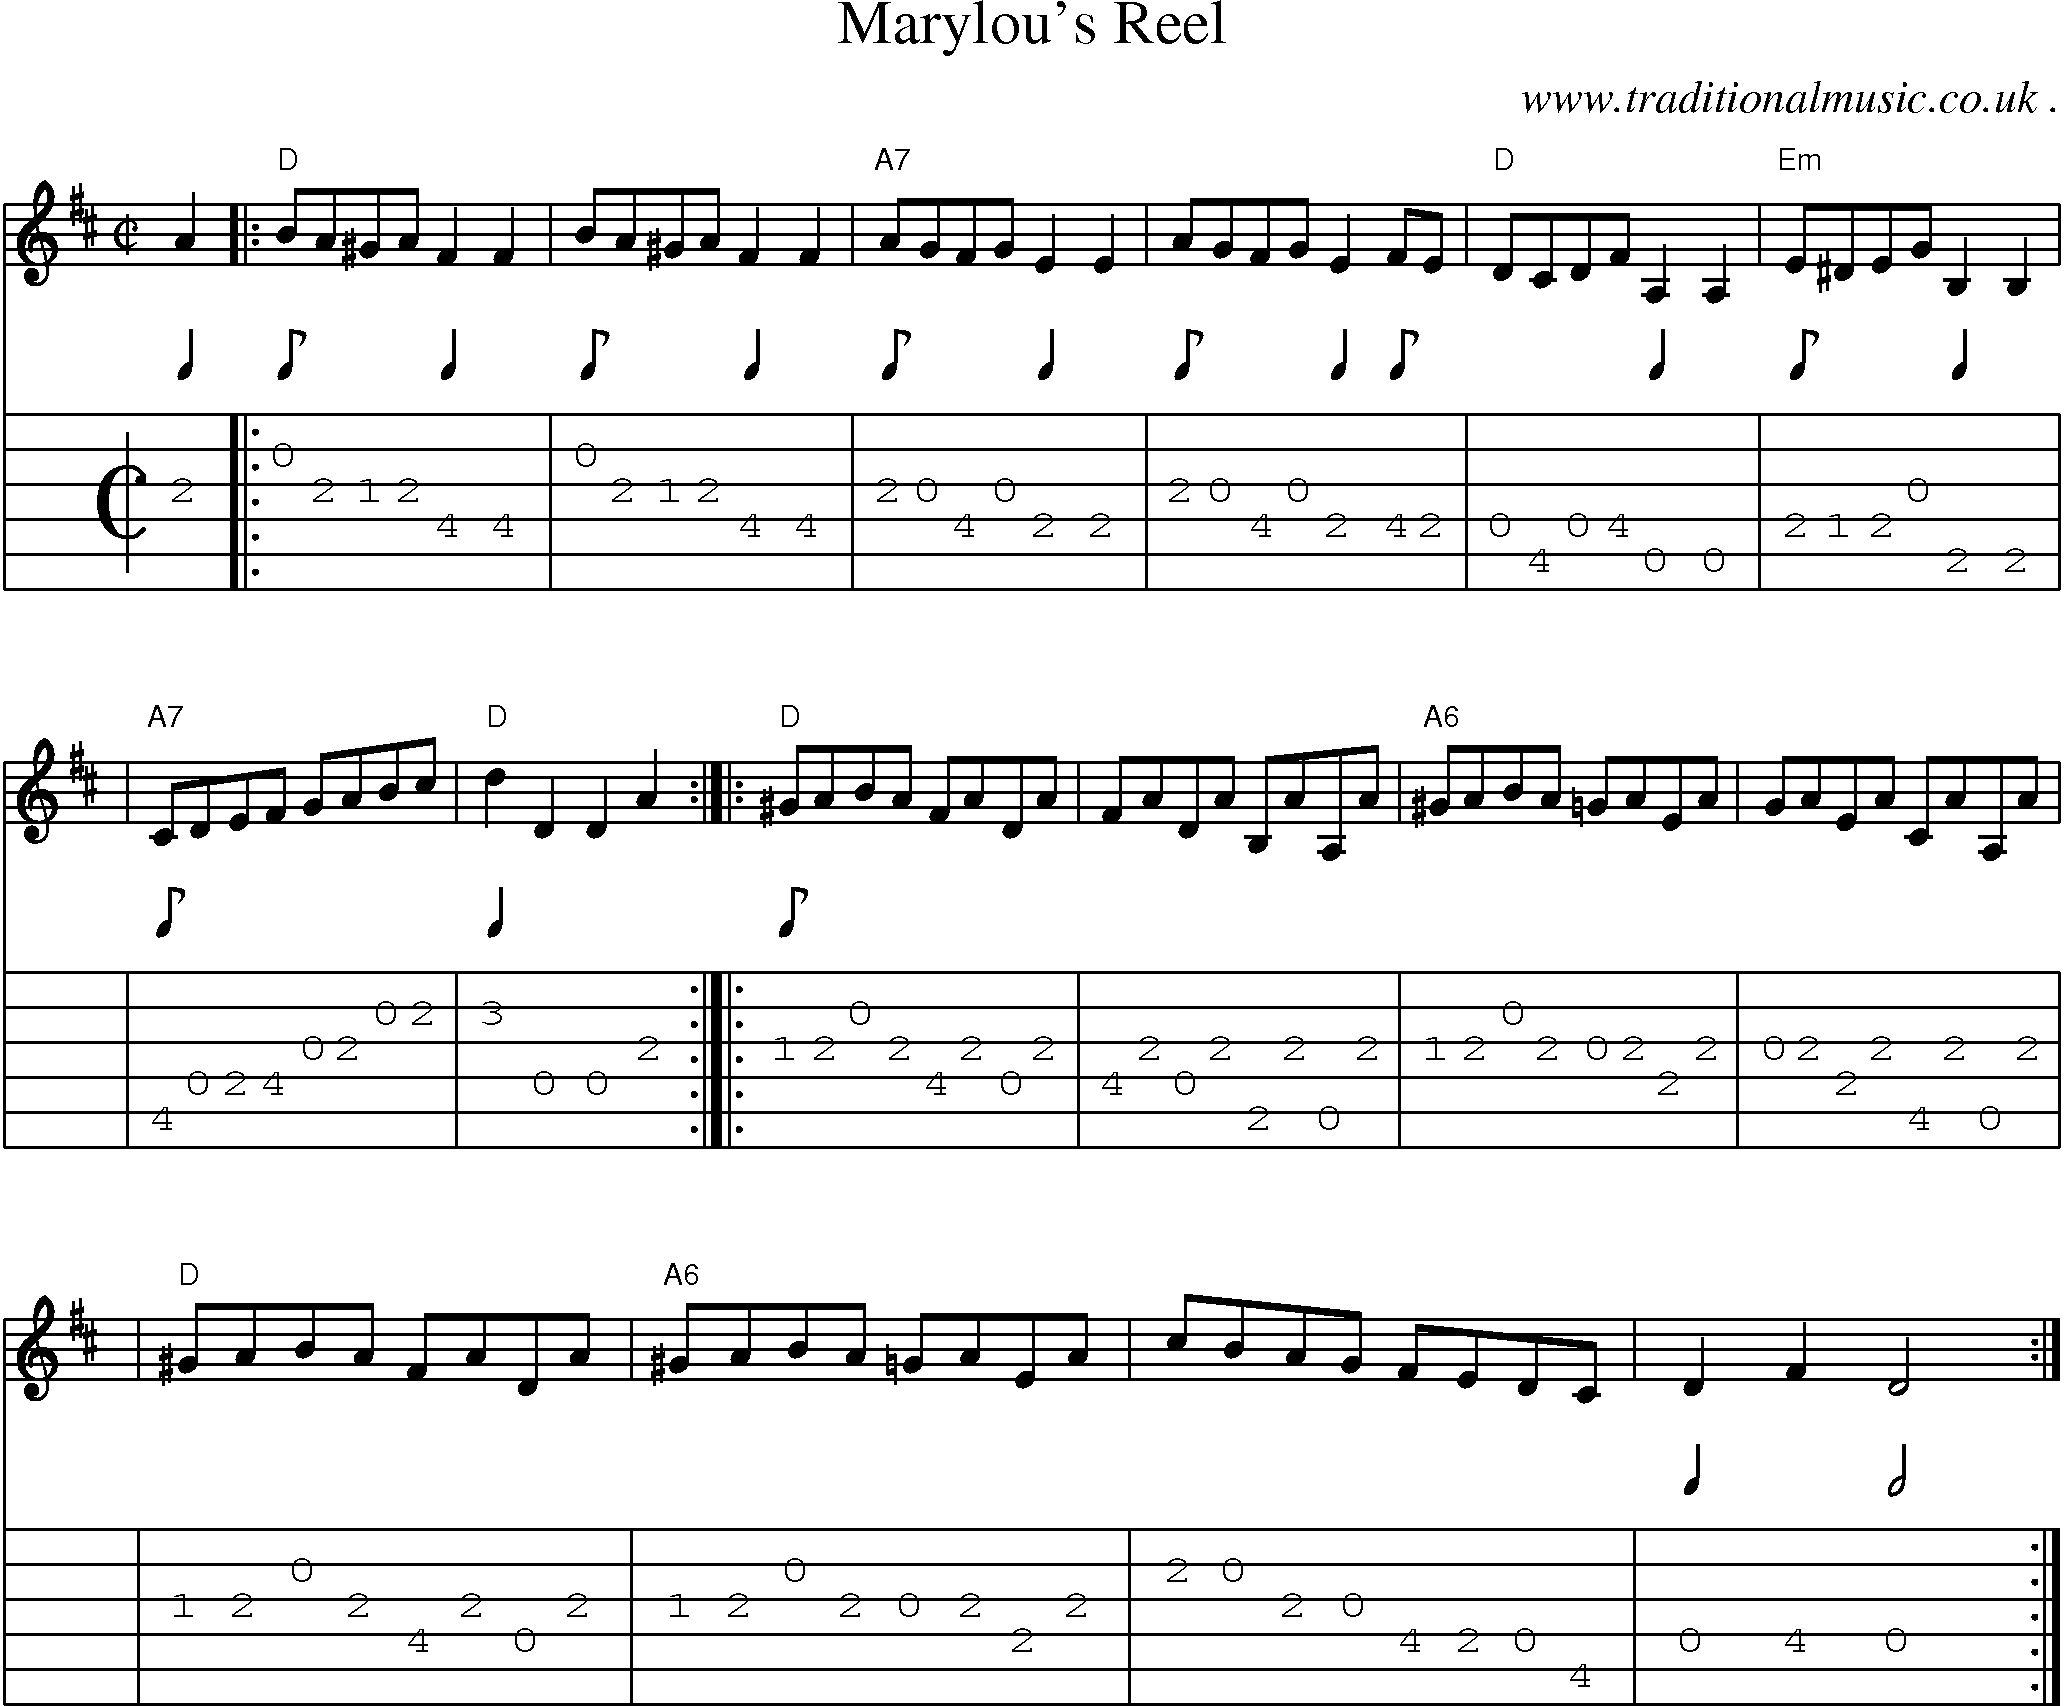 Sheet-music  score, Chords and Guitar Tabs for Marylous Reel